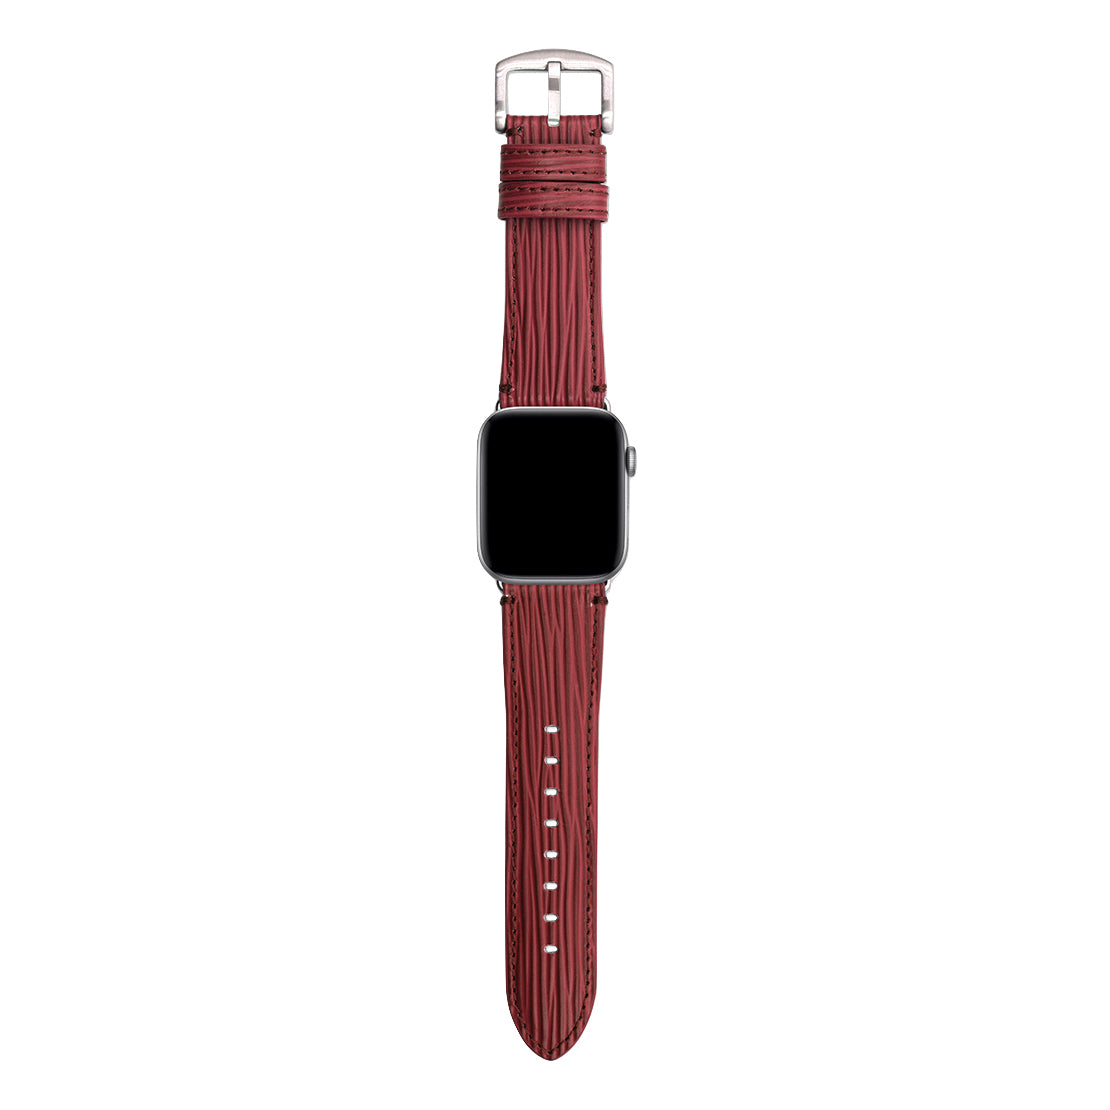 Genuine Leather Wave Pattern Handcrafted Apple Watch Band-Watch Band- phone case - phone cases- phone cover- iphone cover- iphone case- iphone cases- leather case- leather cases- DIYCASE - custom case - leather cover - hand strap case - croco pattern case - snake pattern case - carbon fiber phone case - phone case brand - unique phone case - high quality - phone case brand - protective case - buy phone case hong kong - online buy phone case - iphone‎手機殼 - 客製化手機殼 - samsung ‎手機殼 - 香港手機殼 - 買電話殼